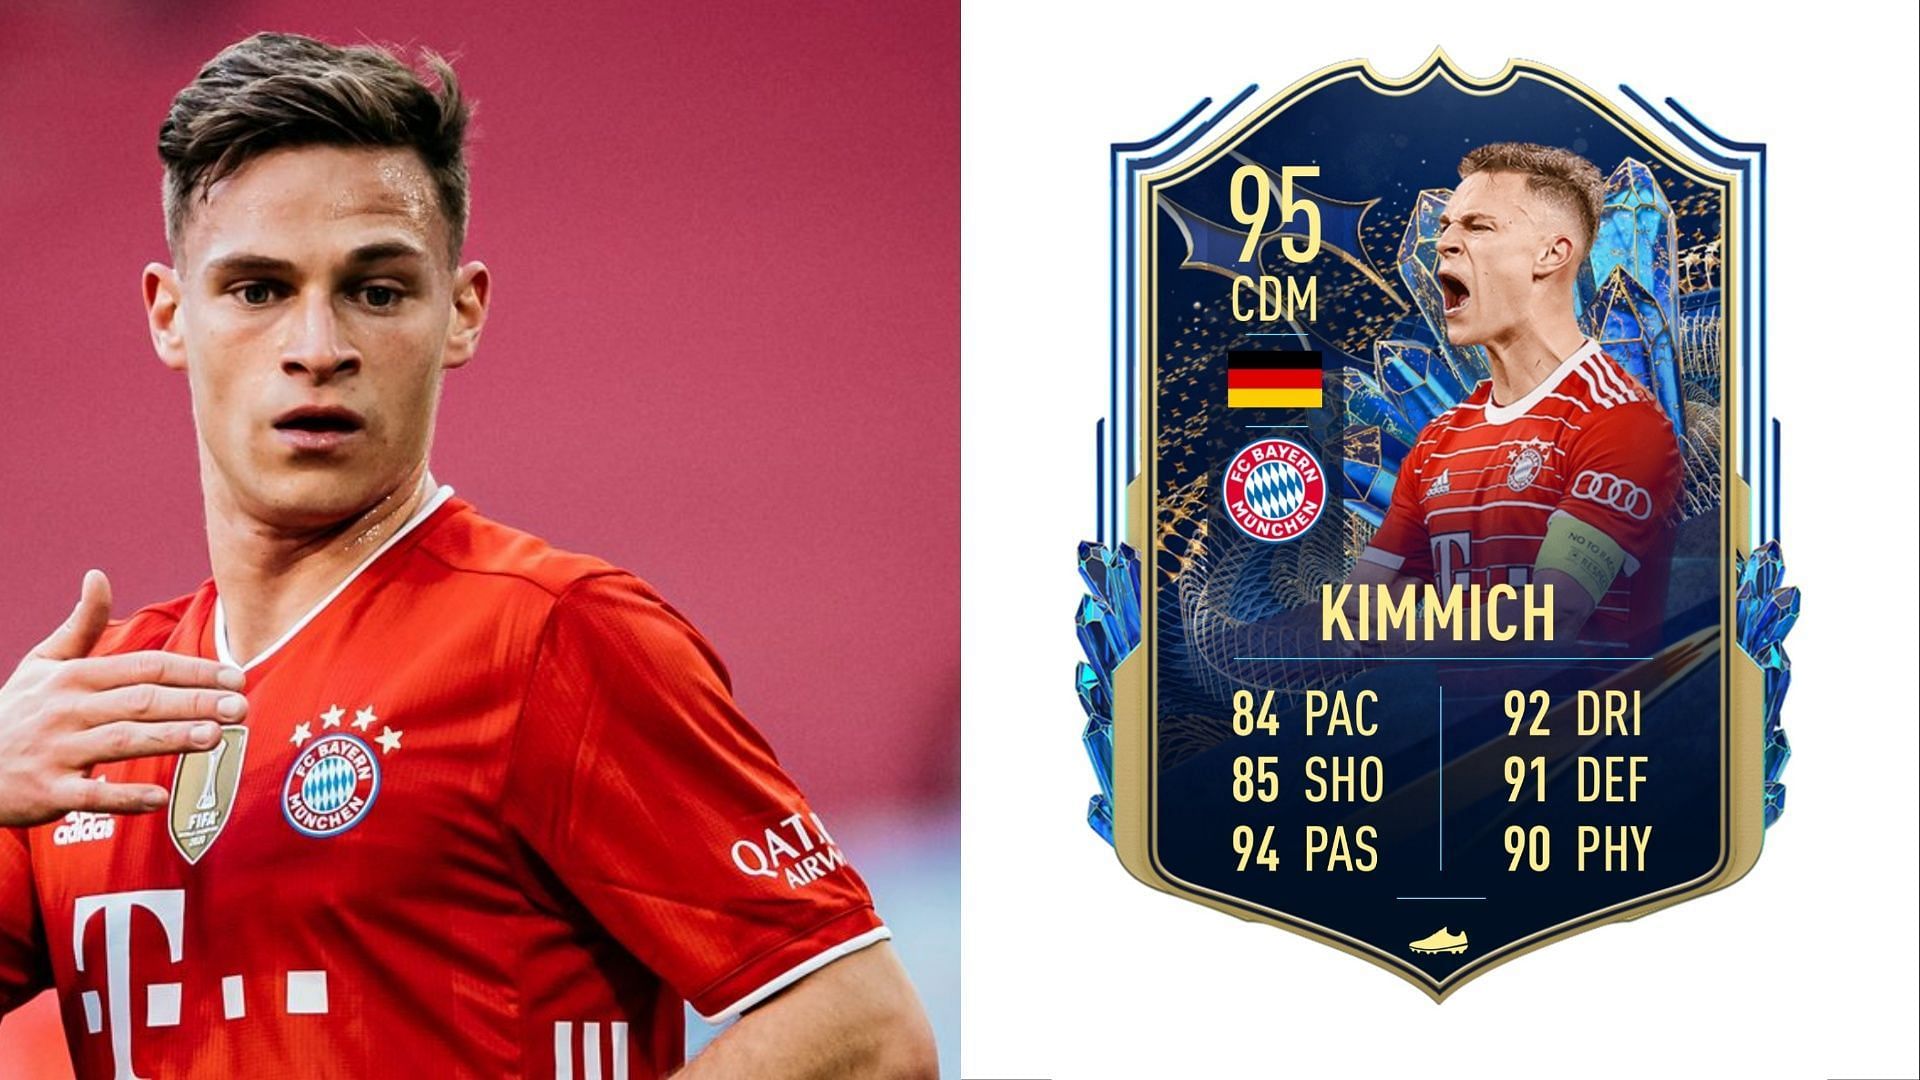 Many FIFA 23 players could highly covet the Bundesliga TOTS card of Joshua Kimmich (Images via Bundesliga, Twitter/FIFA 23 leaks)